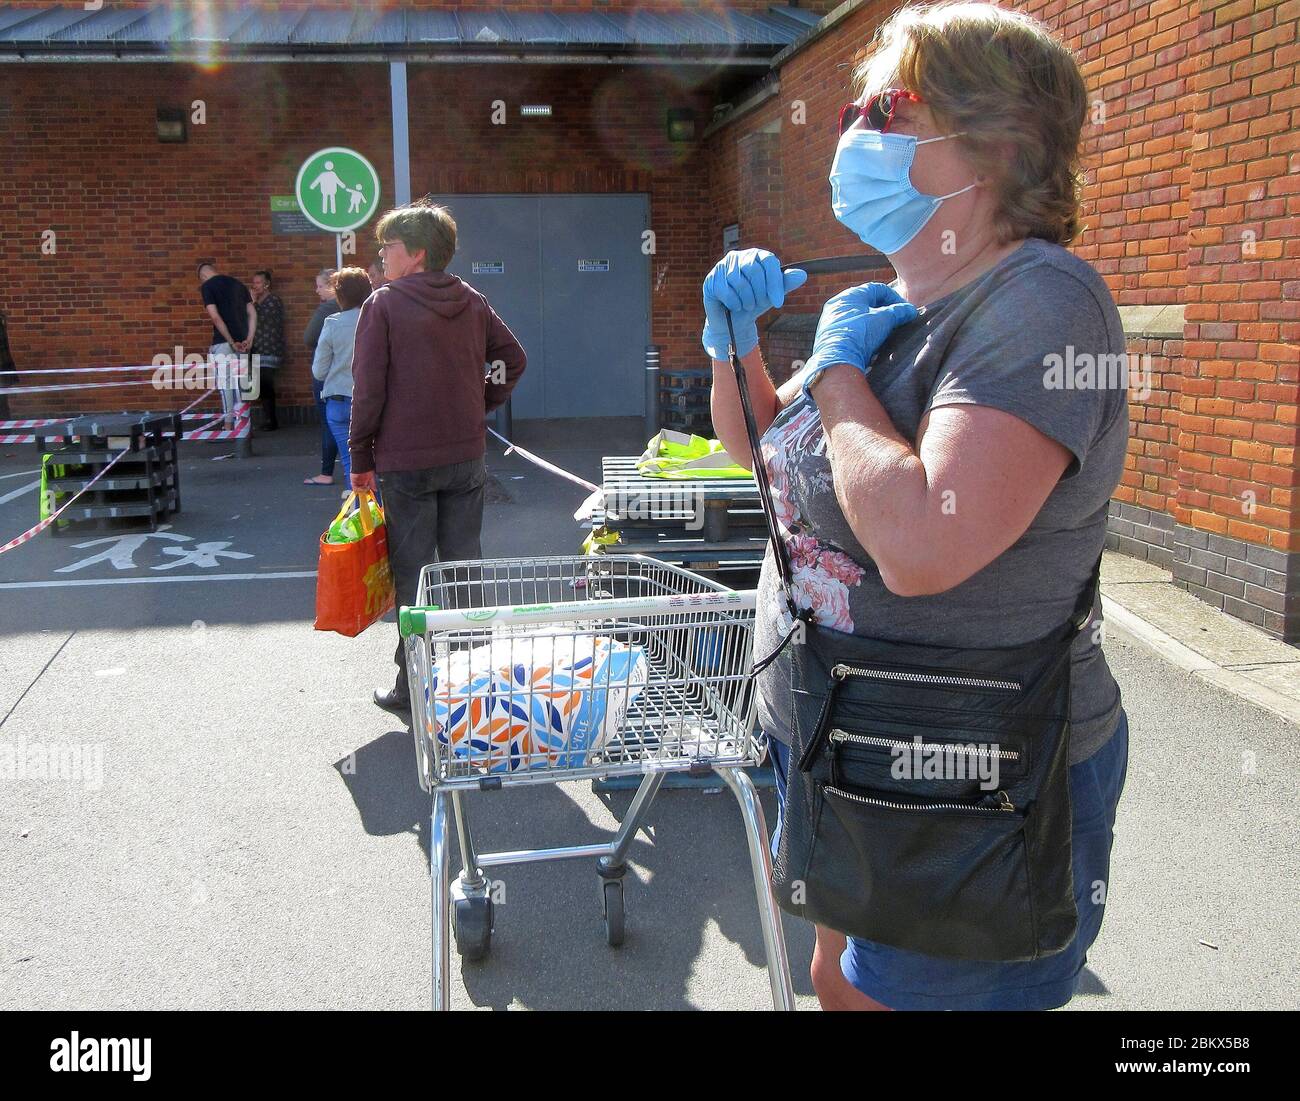 A woman wearing a face mask and gloves as a precaution while in a  queues to enter a supermarket amid Coronavirus pandemic.Shoppers Queue and observe necessary Social distancing which has become the new rule in the UK. Stock Photo